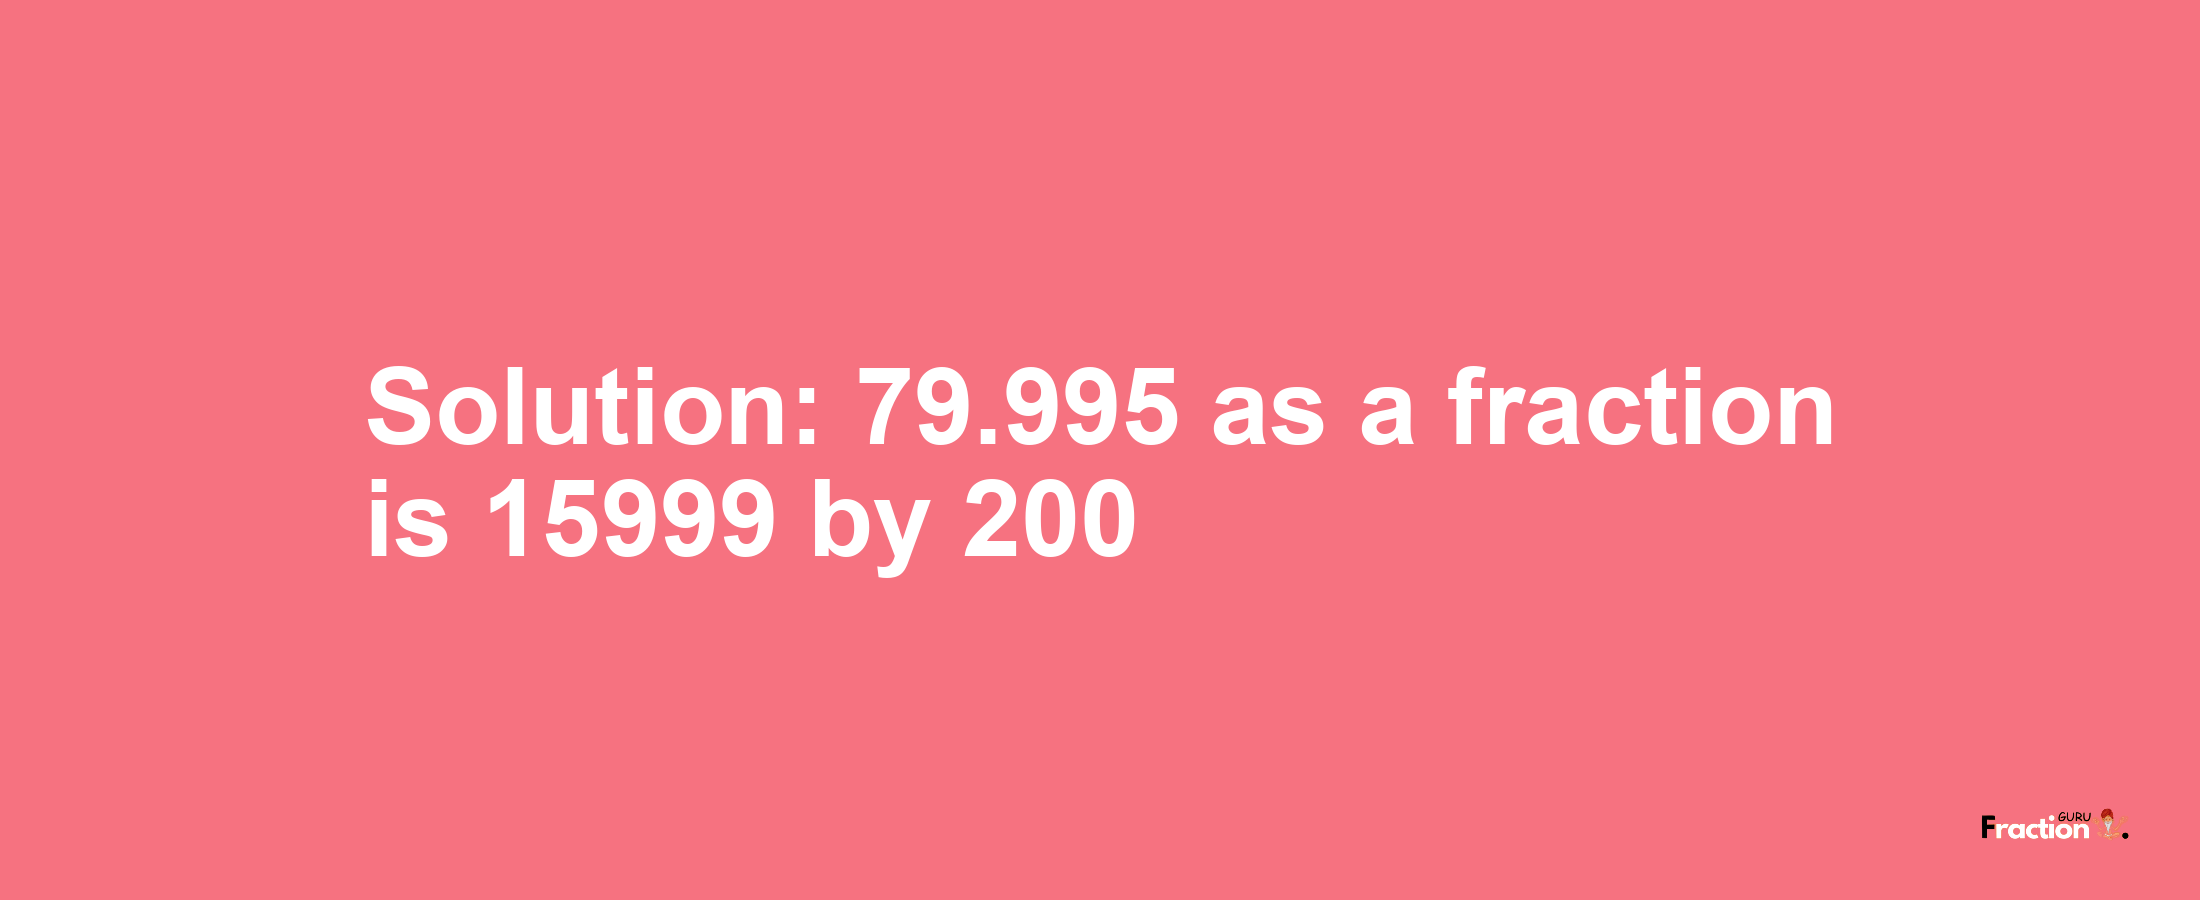 Solution:79.995 as a fraction is 15999/200